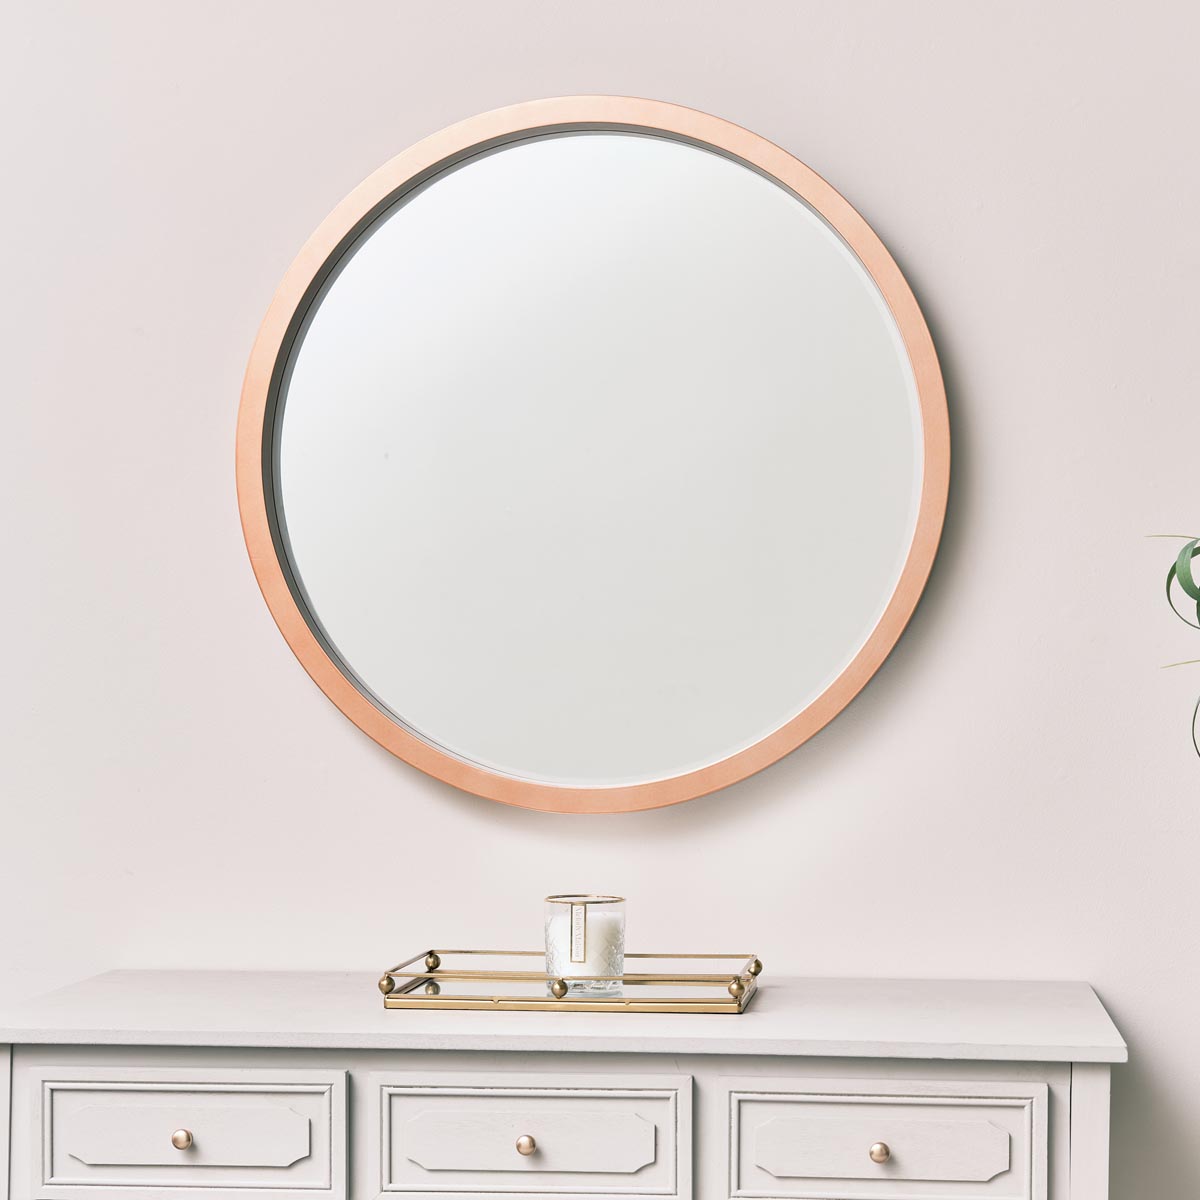 Large Round Copper Wall Mirror 80cm X, Large Copper Round Wall Mirror